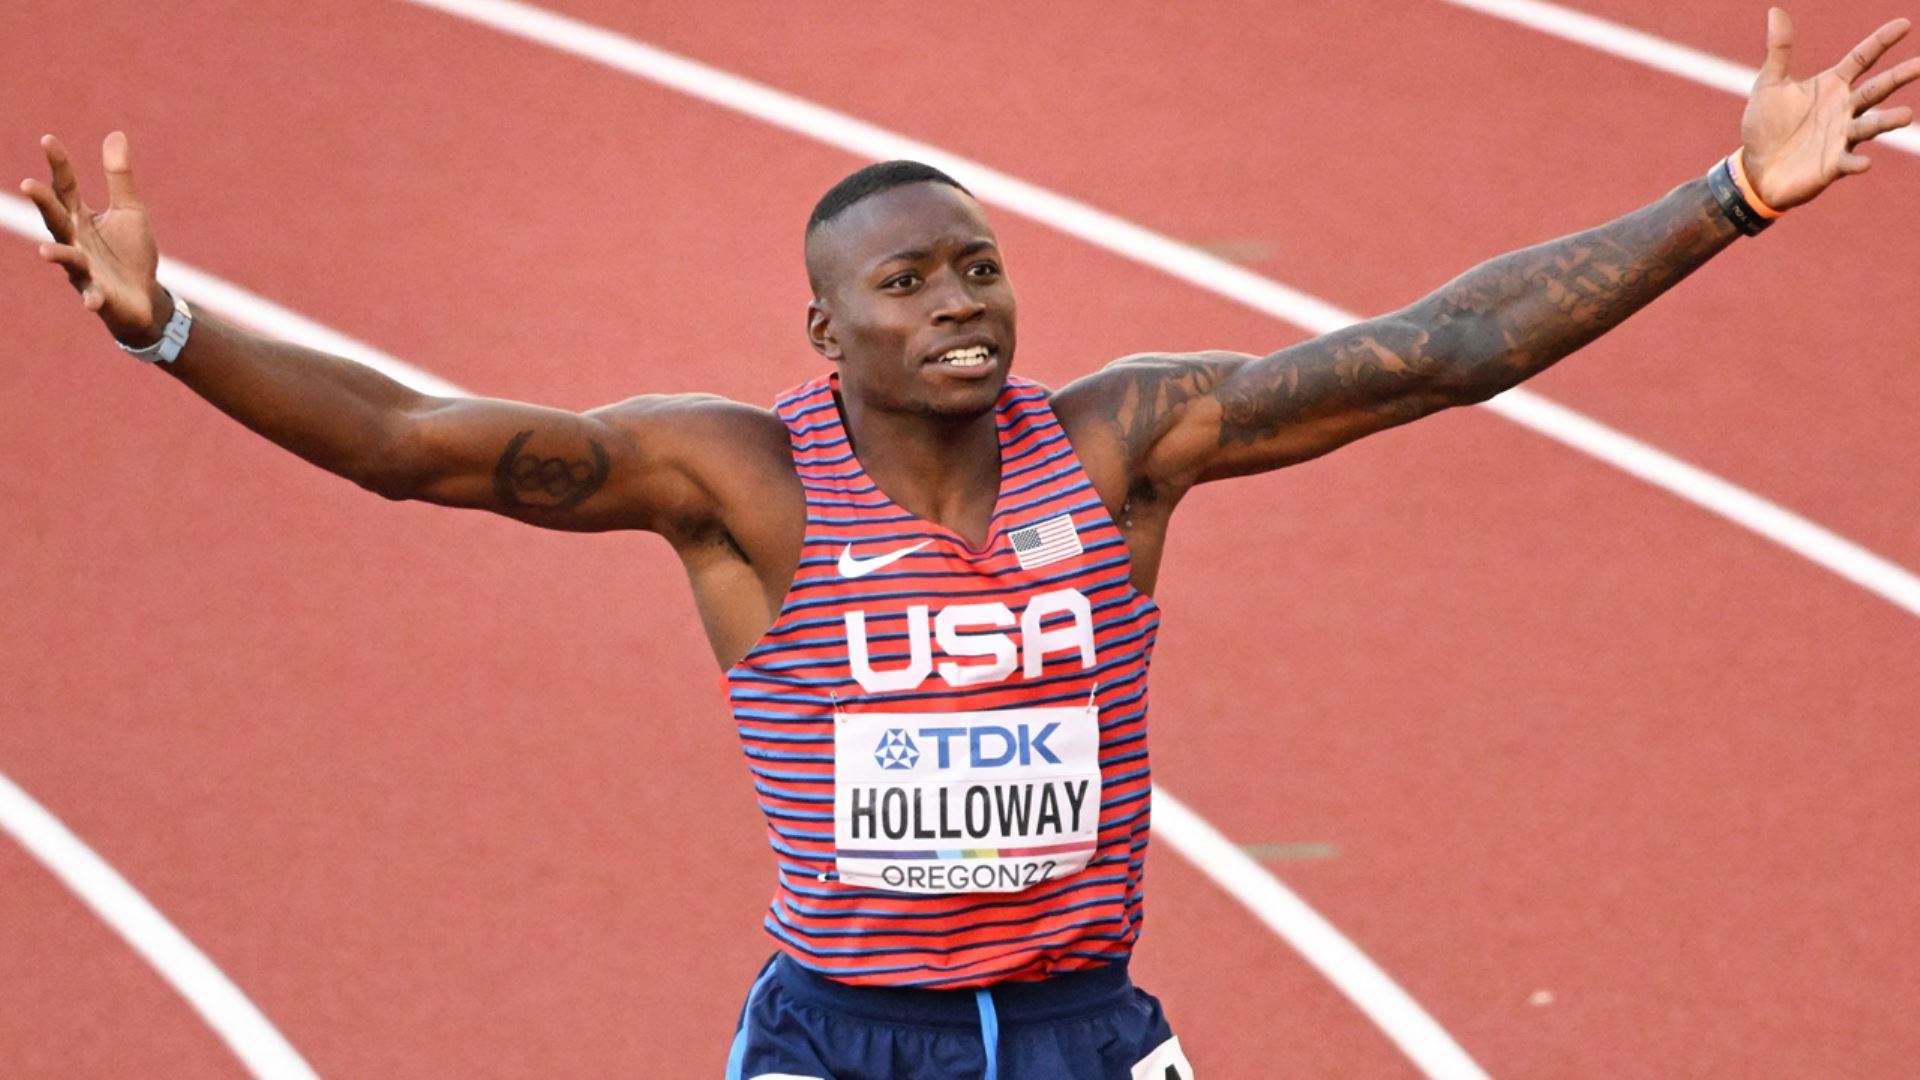 What is Grant Holloway's net worth, salary and brand endorsements?